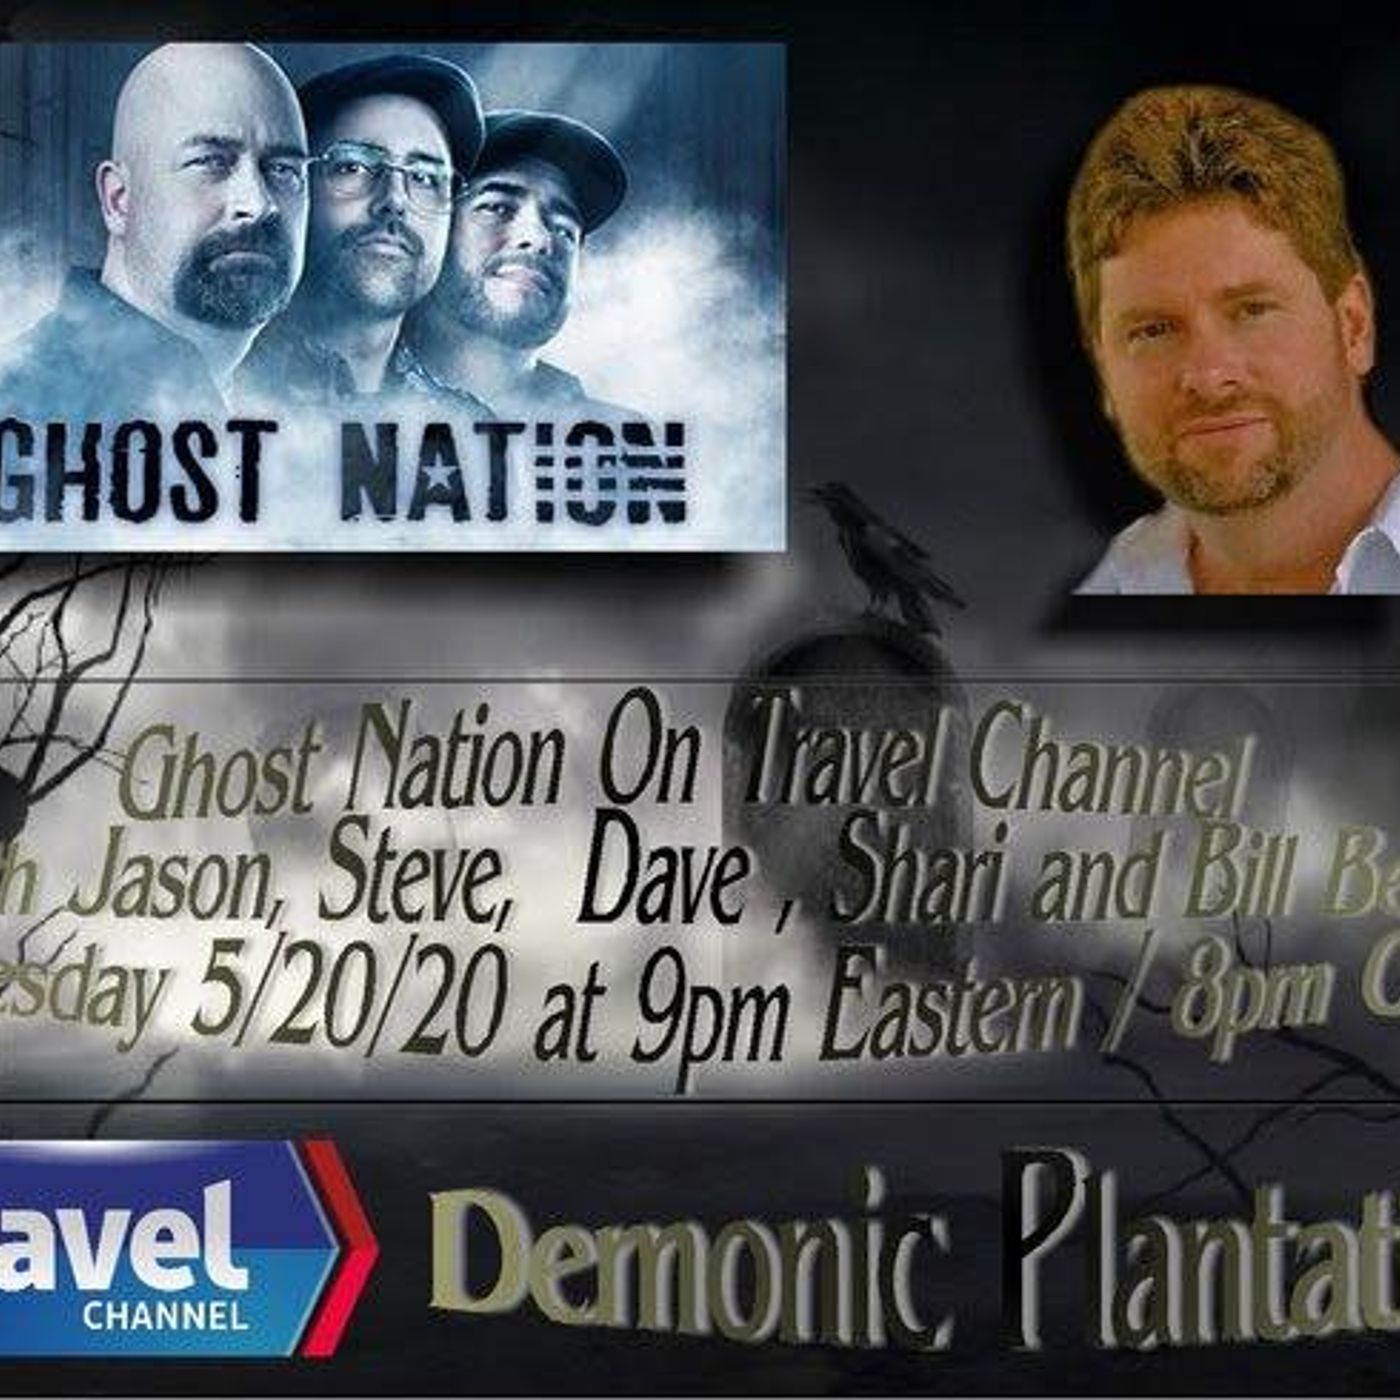 Bill Bean Co-Star of Ghost Nation-Travel Channel